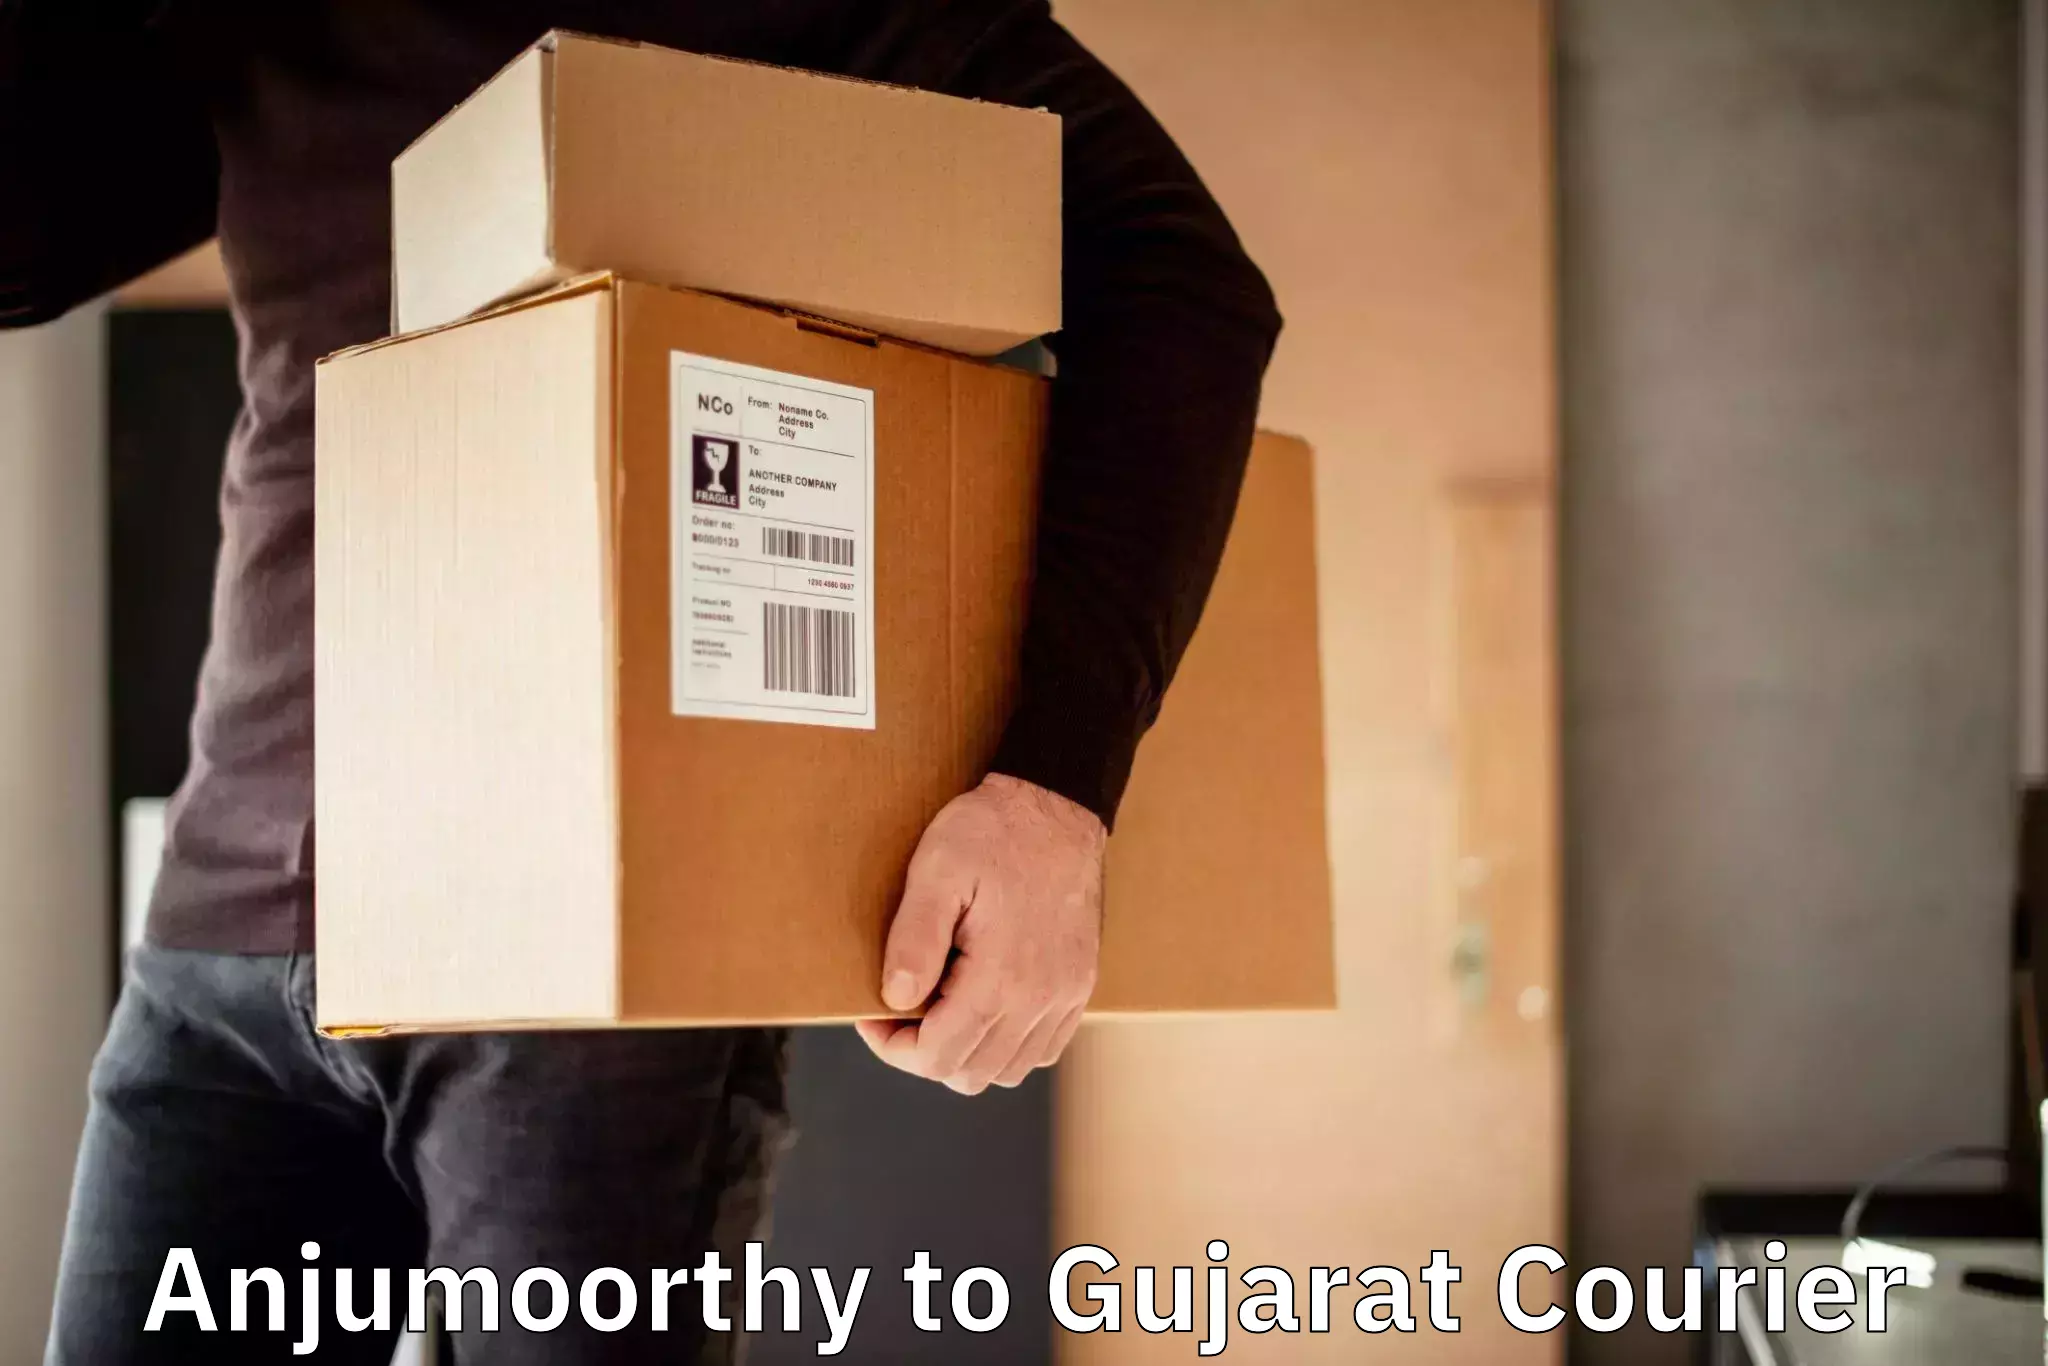 Optimized delivery routes Anjumoorthy to Gujarat